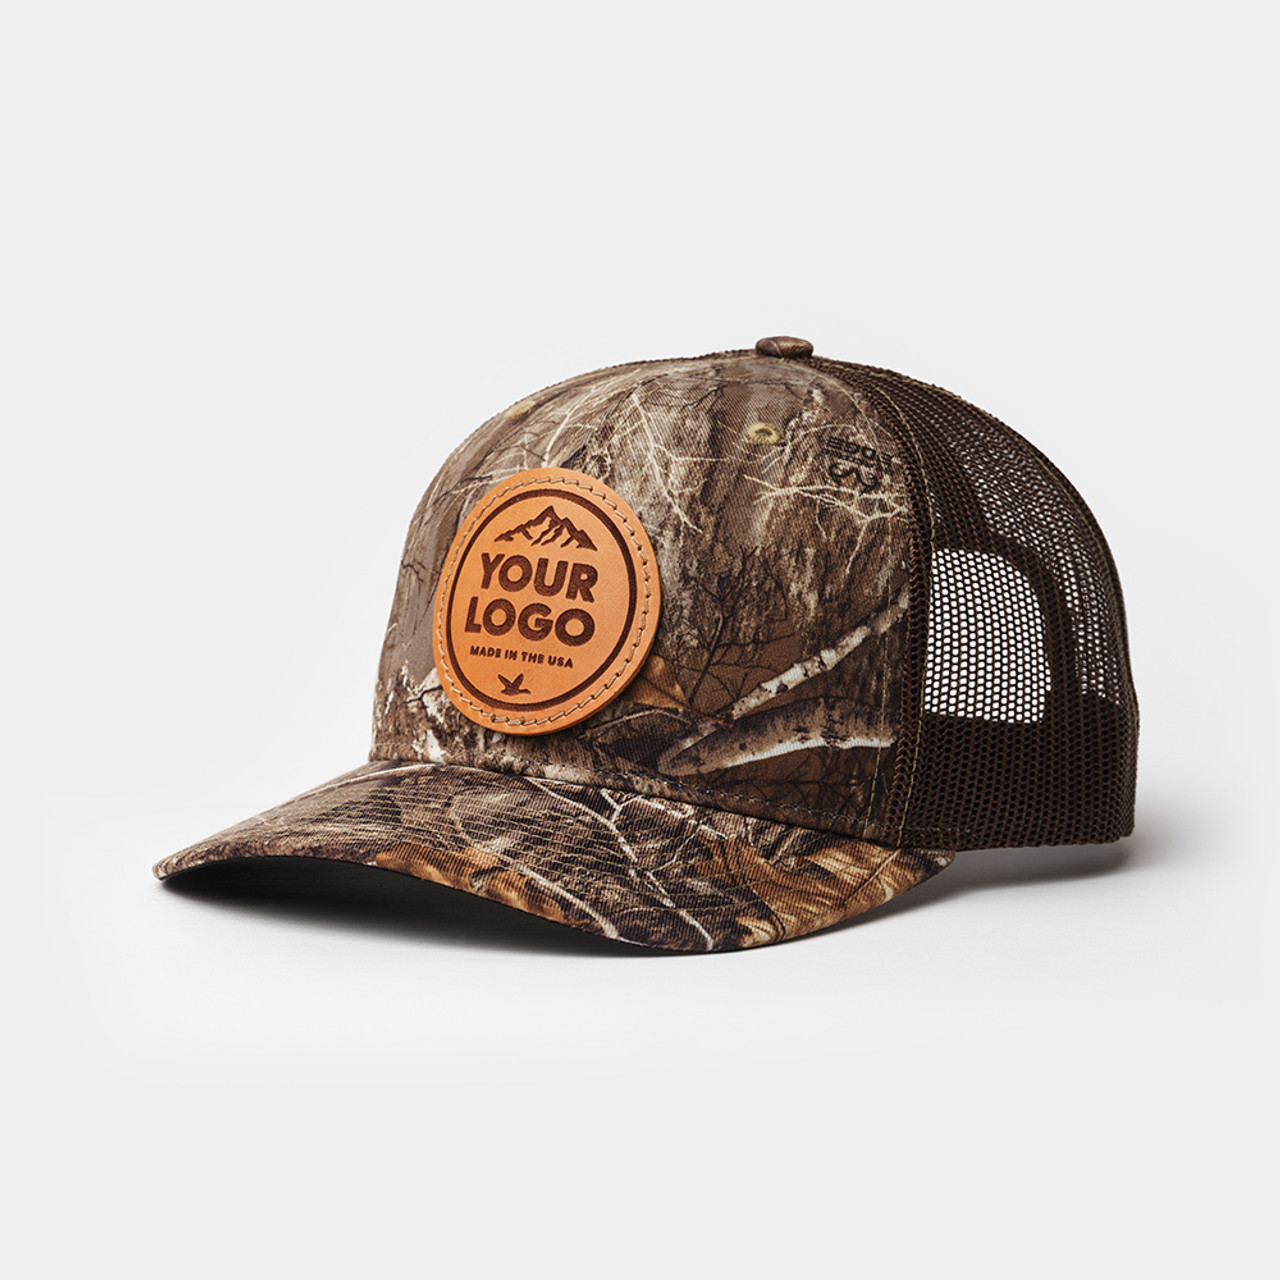 Leather Patch Trucker Hat - Tactipup